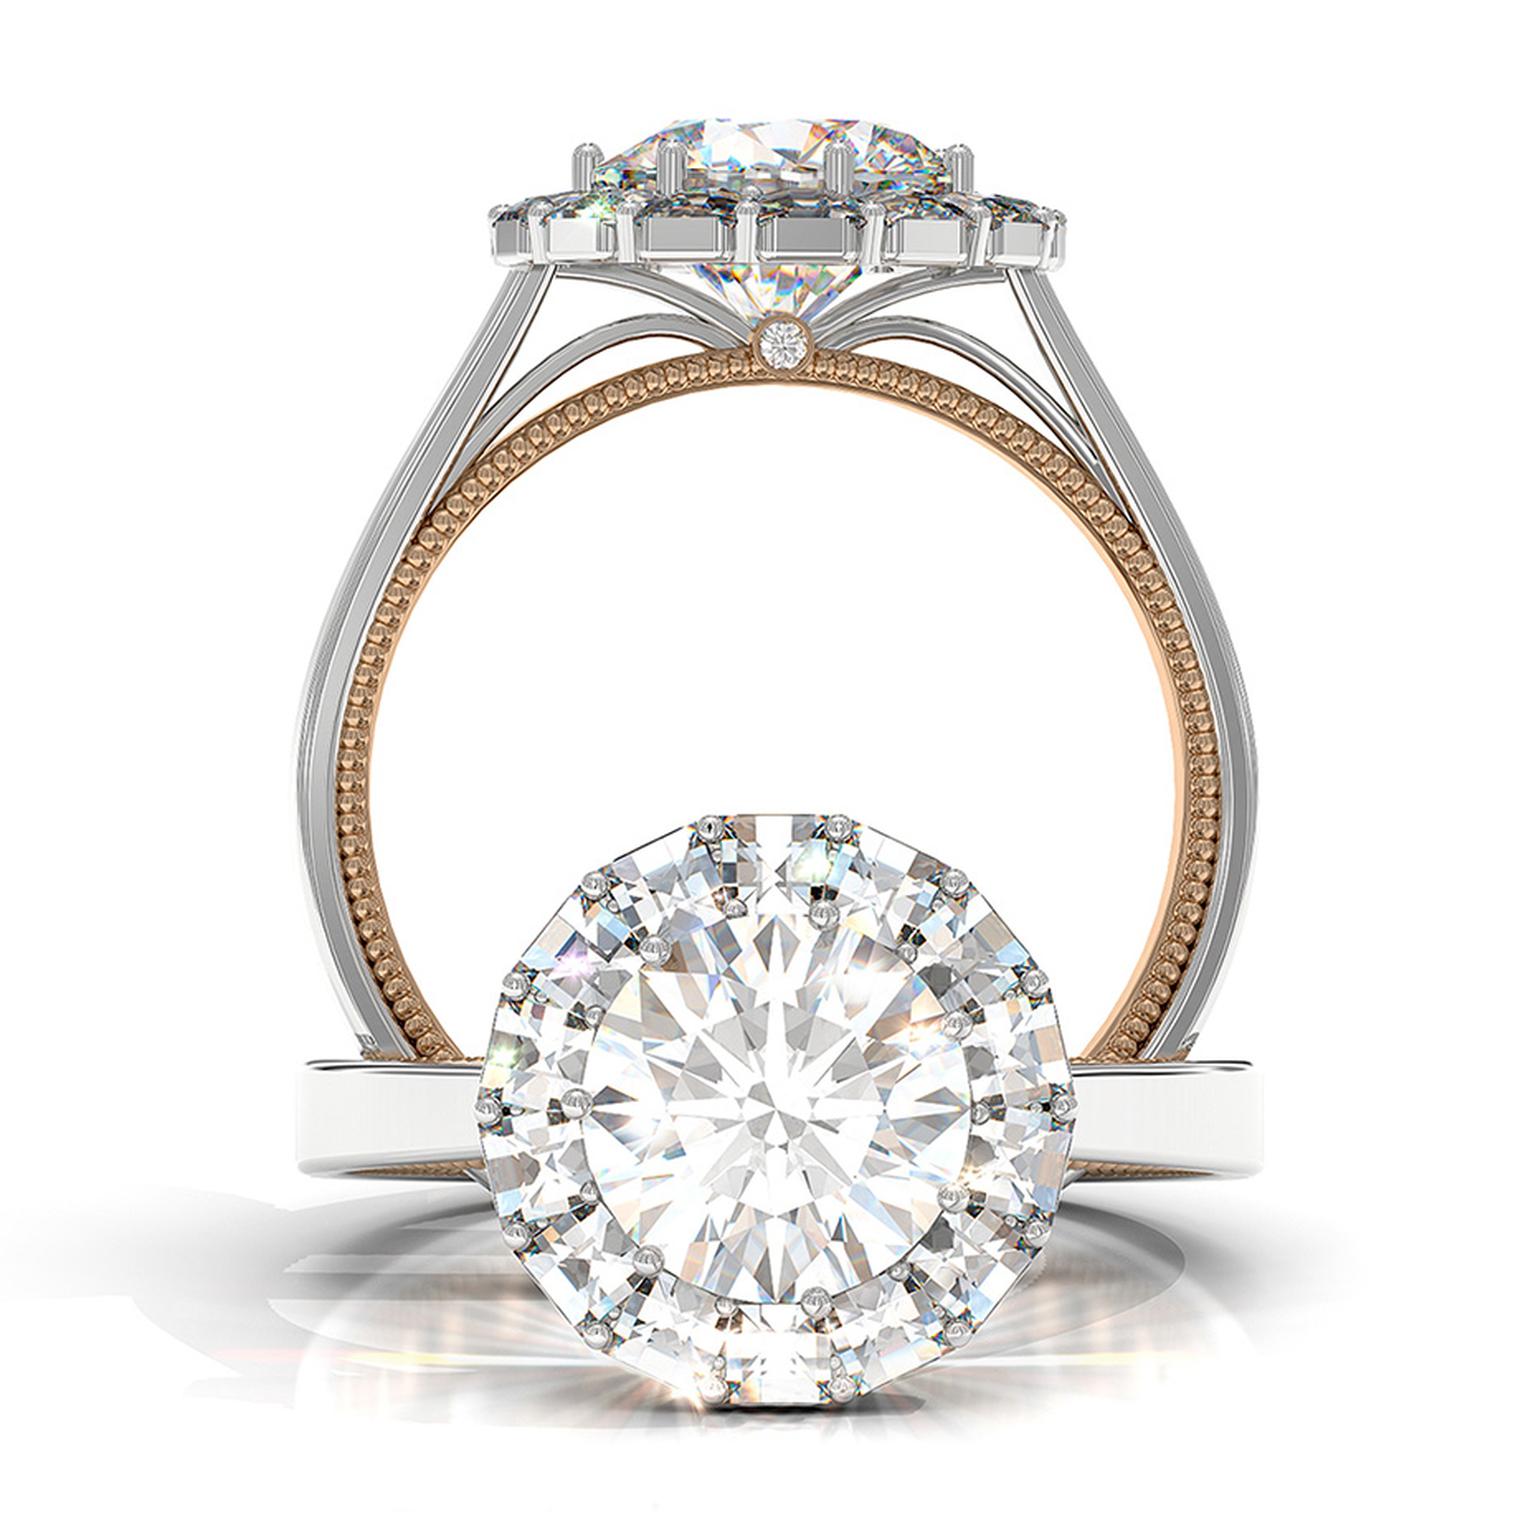 Bez Ambar Ring of Fire engagement ring in white and rose gold, set with a 1.50ct round brilliant cut diamond encircled by a halo of his signature Blaze-cut diamonds, which add fire and give the appearance of a bigger central stone.